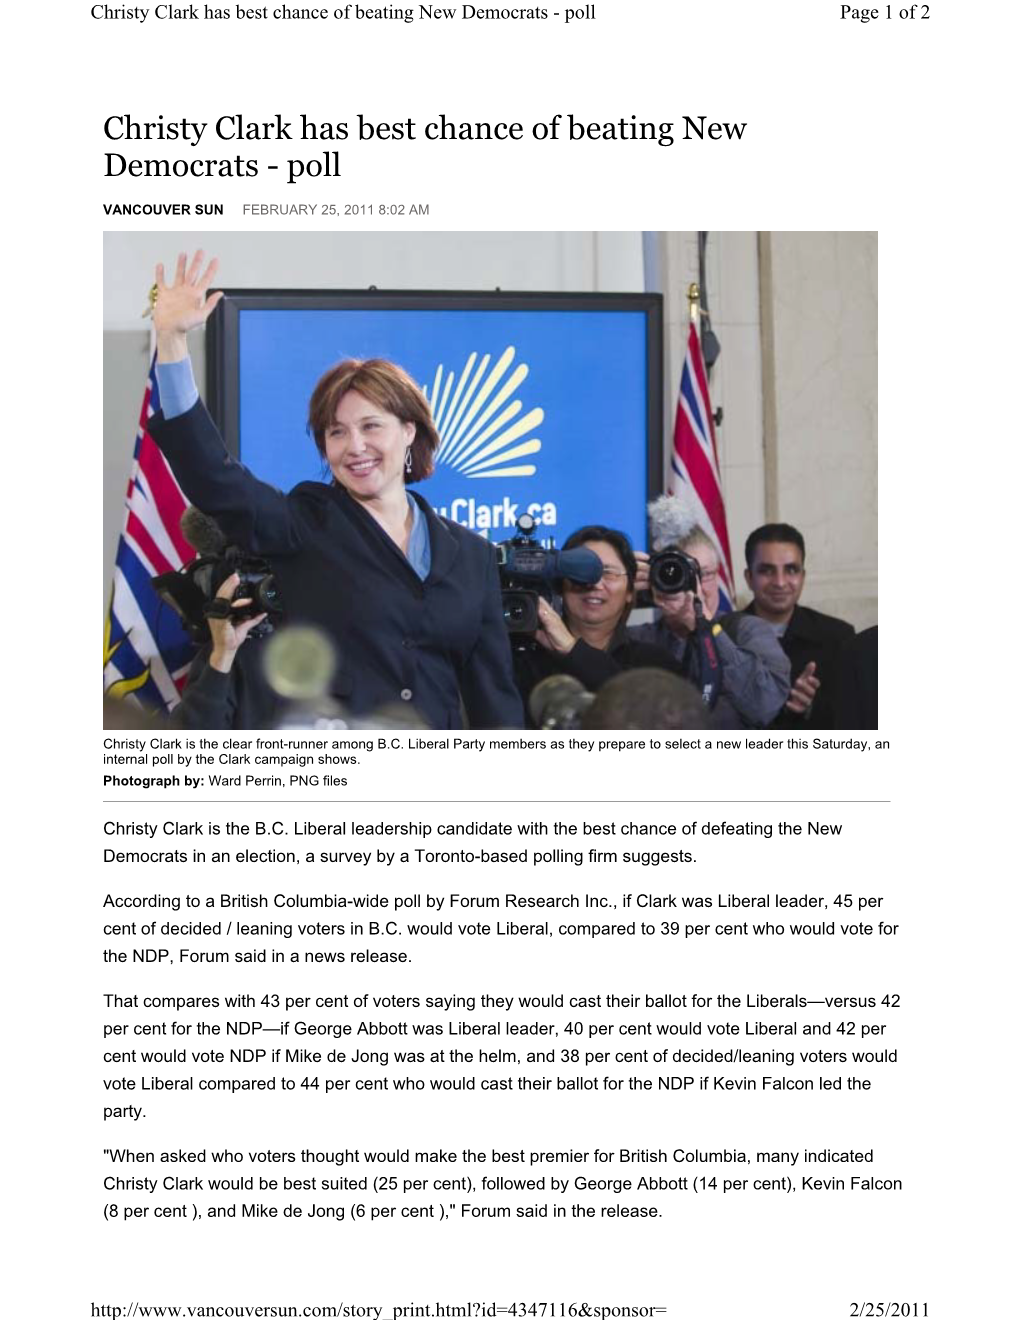 Christy Clark Has Best Chance of Beating New Democrats - Poll Page 1 of 2